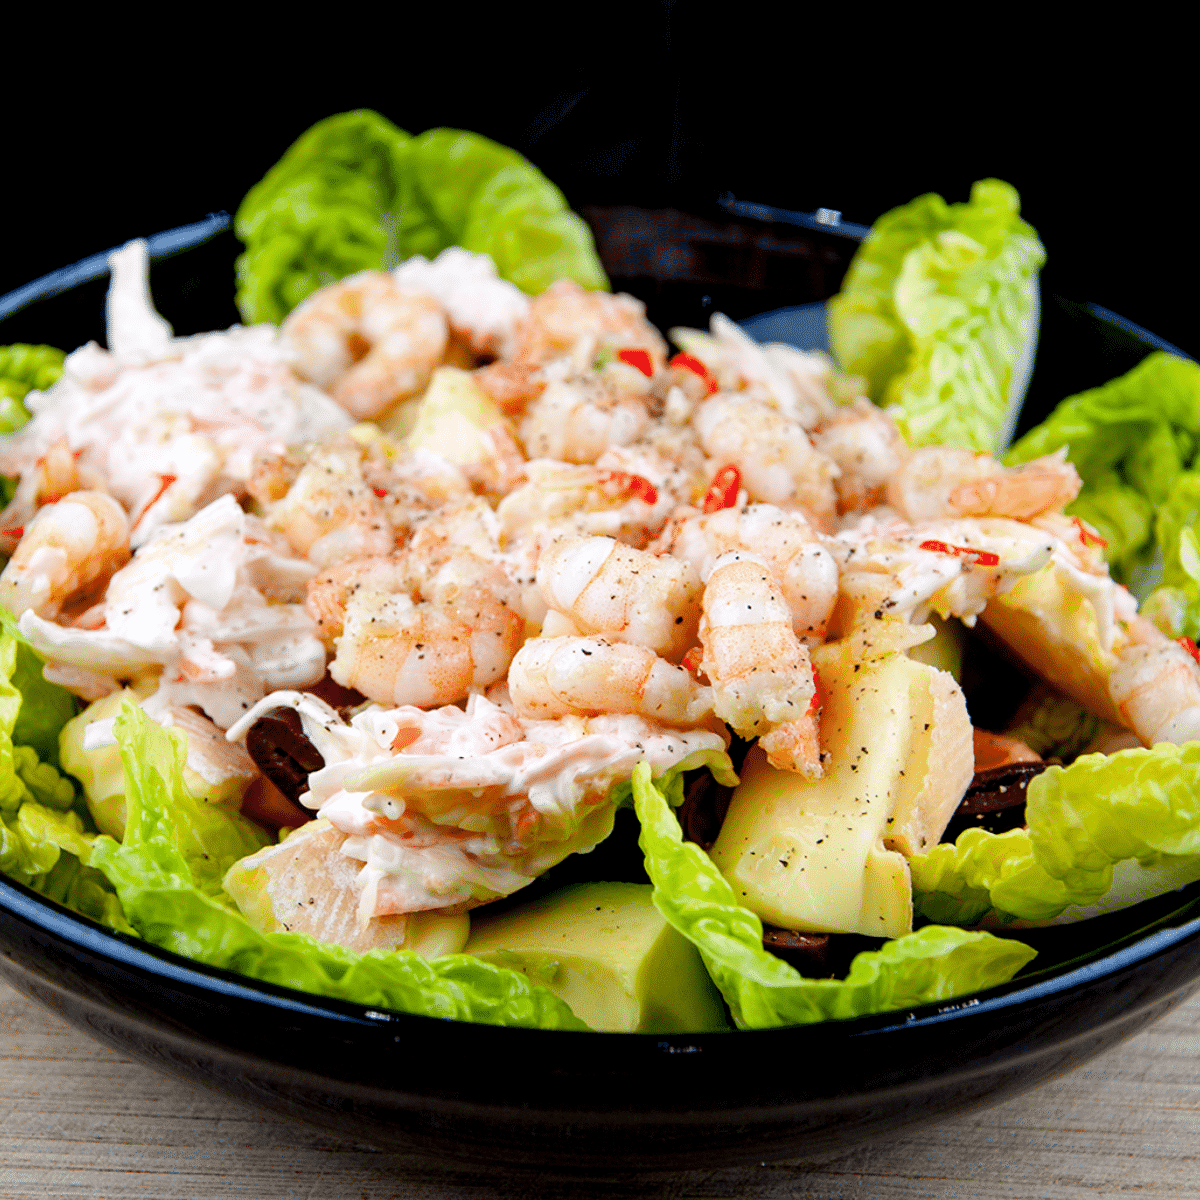 This is an amazing hot prawn salad. So tasty and so yummy. Yes, there's a touch of cheese and slaw but combined with the prawns, chilli and garlic! Wow!! | theyumyumclub.com